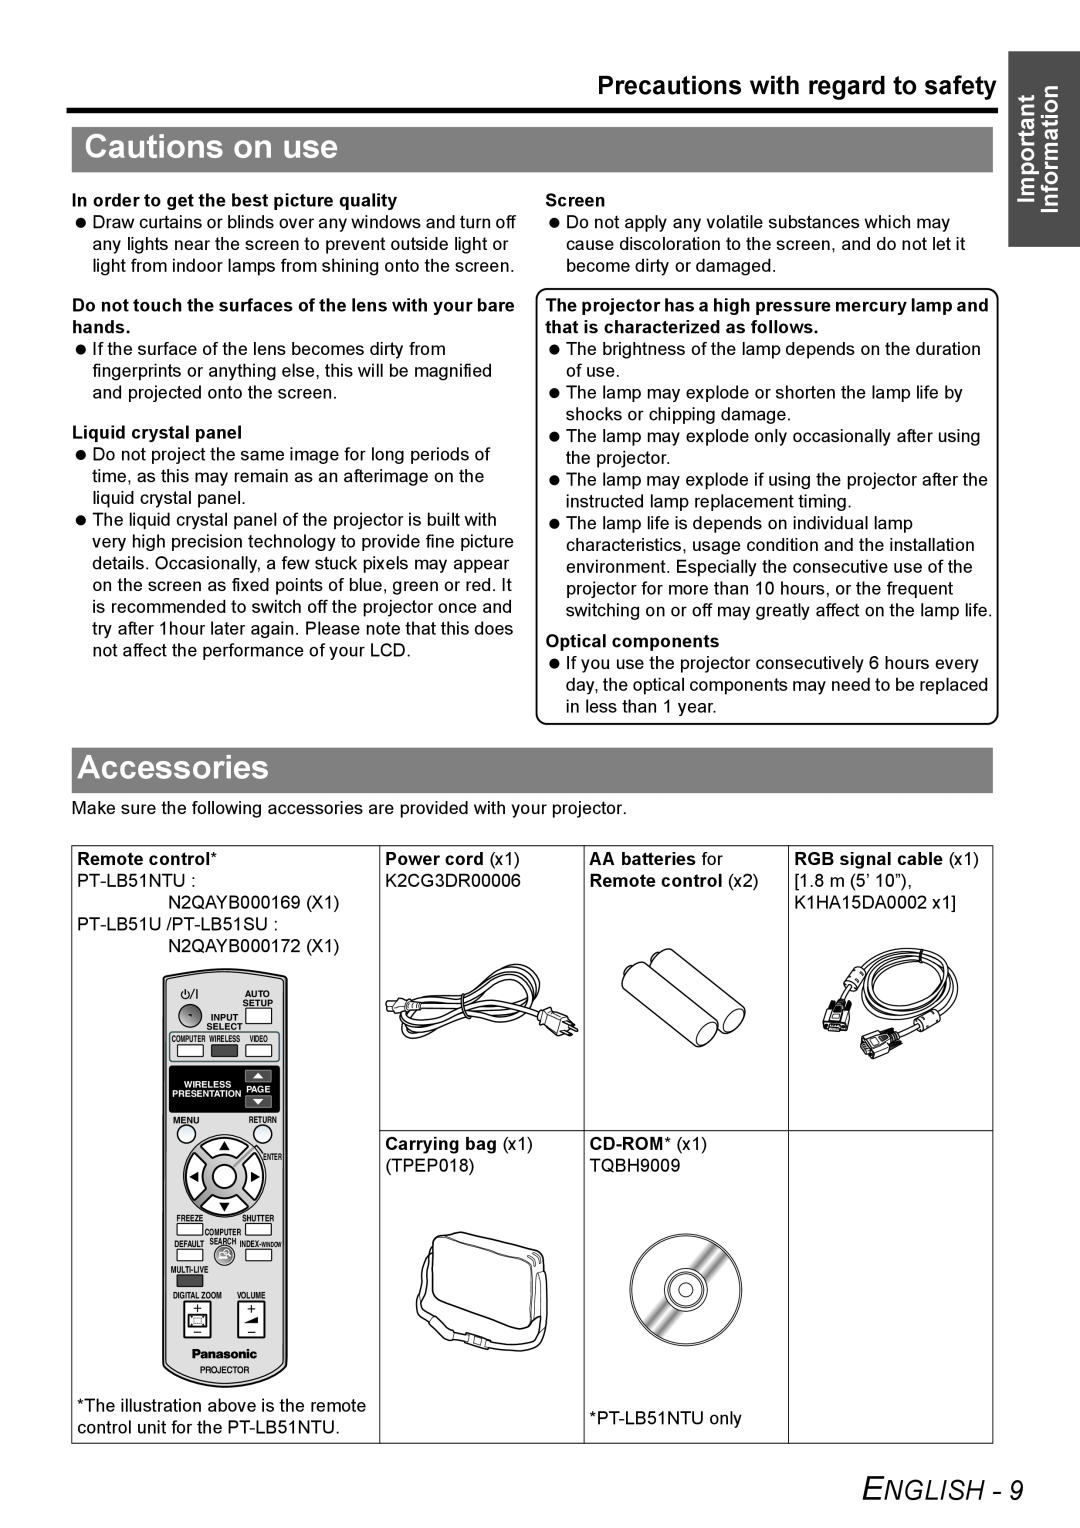 Philips PT-LB51SU manual Cautions on use, Accessories, English, Precautions with regard to safety, Important Information 